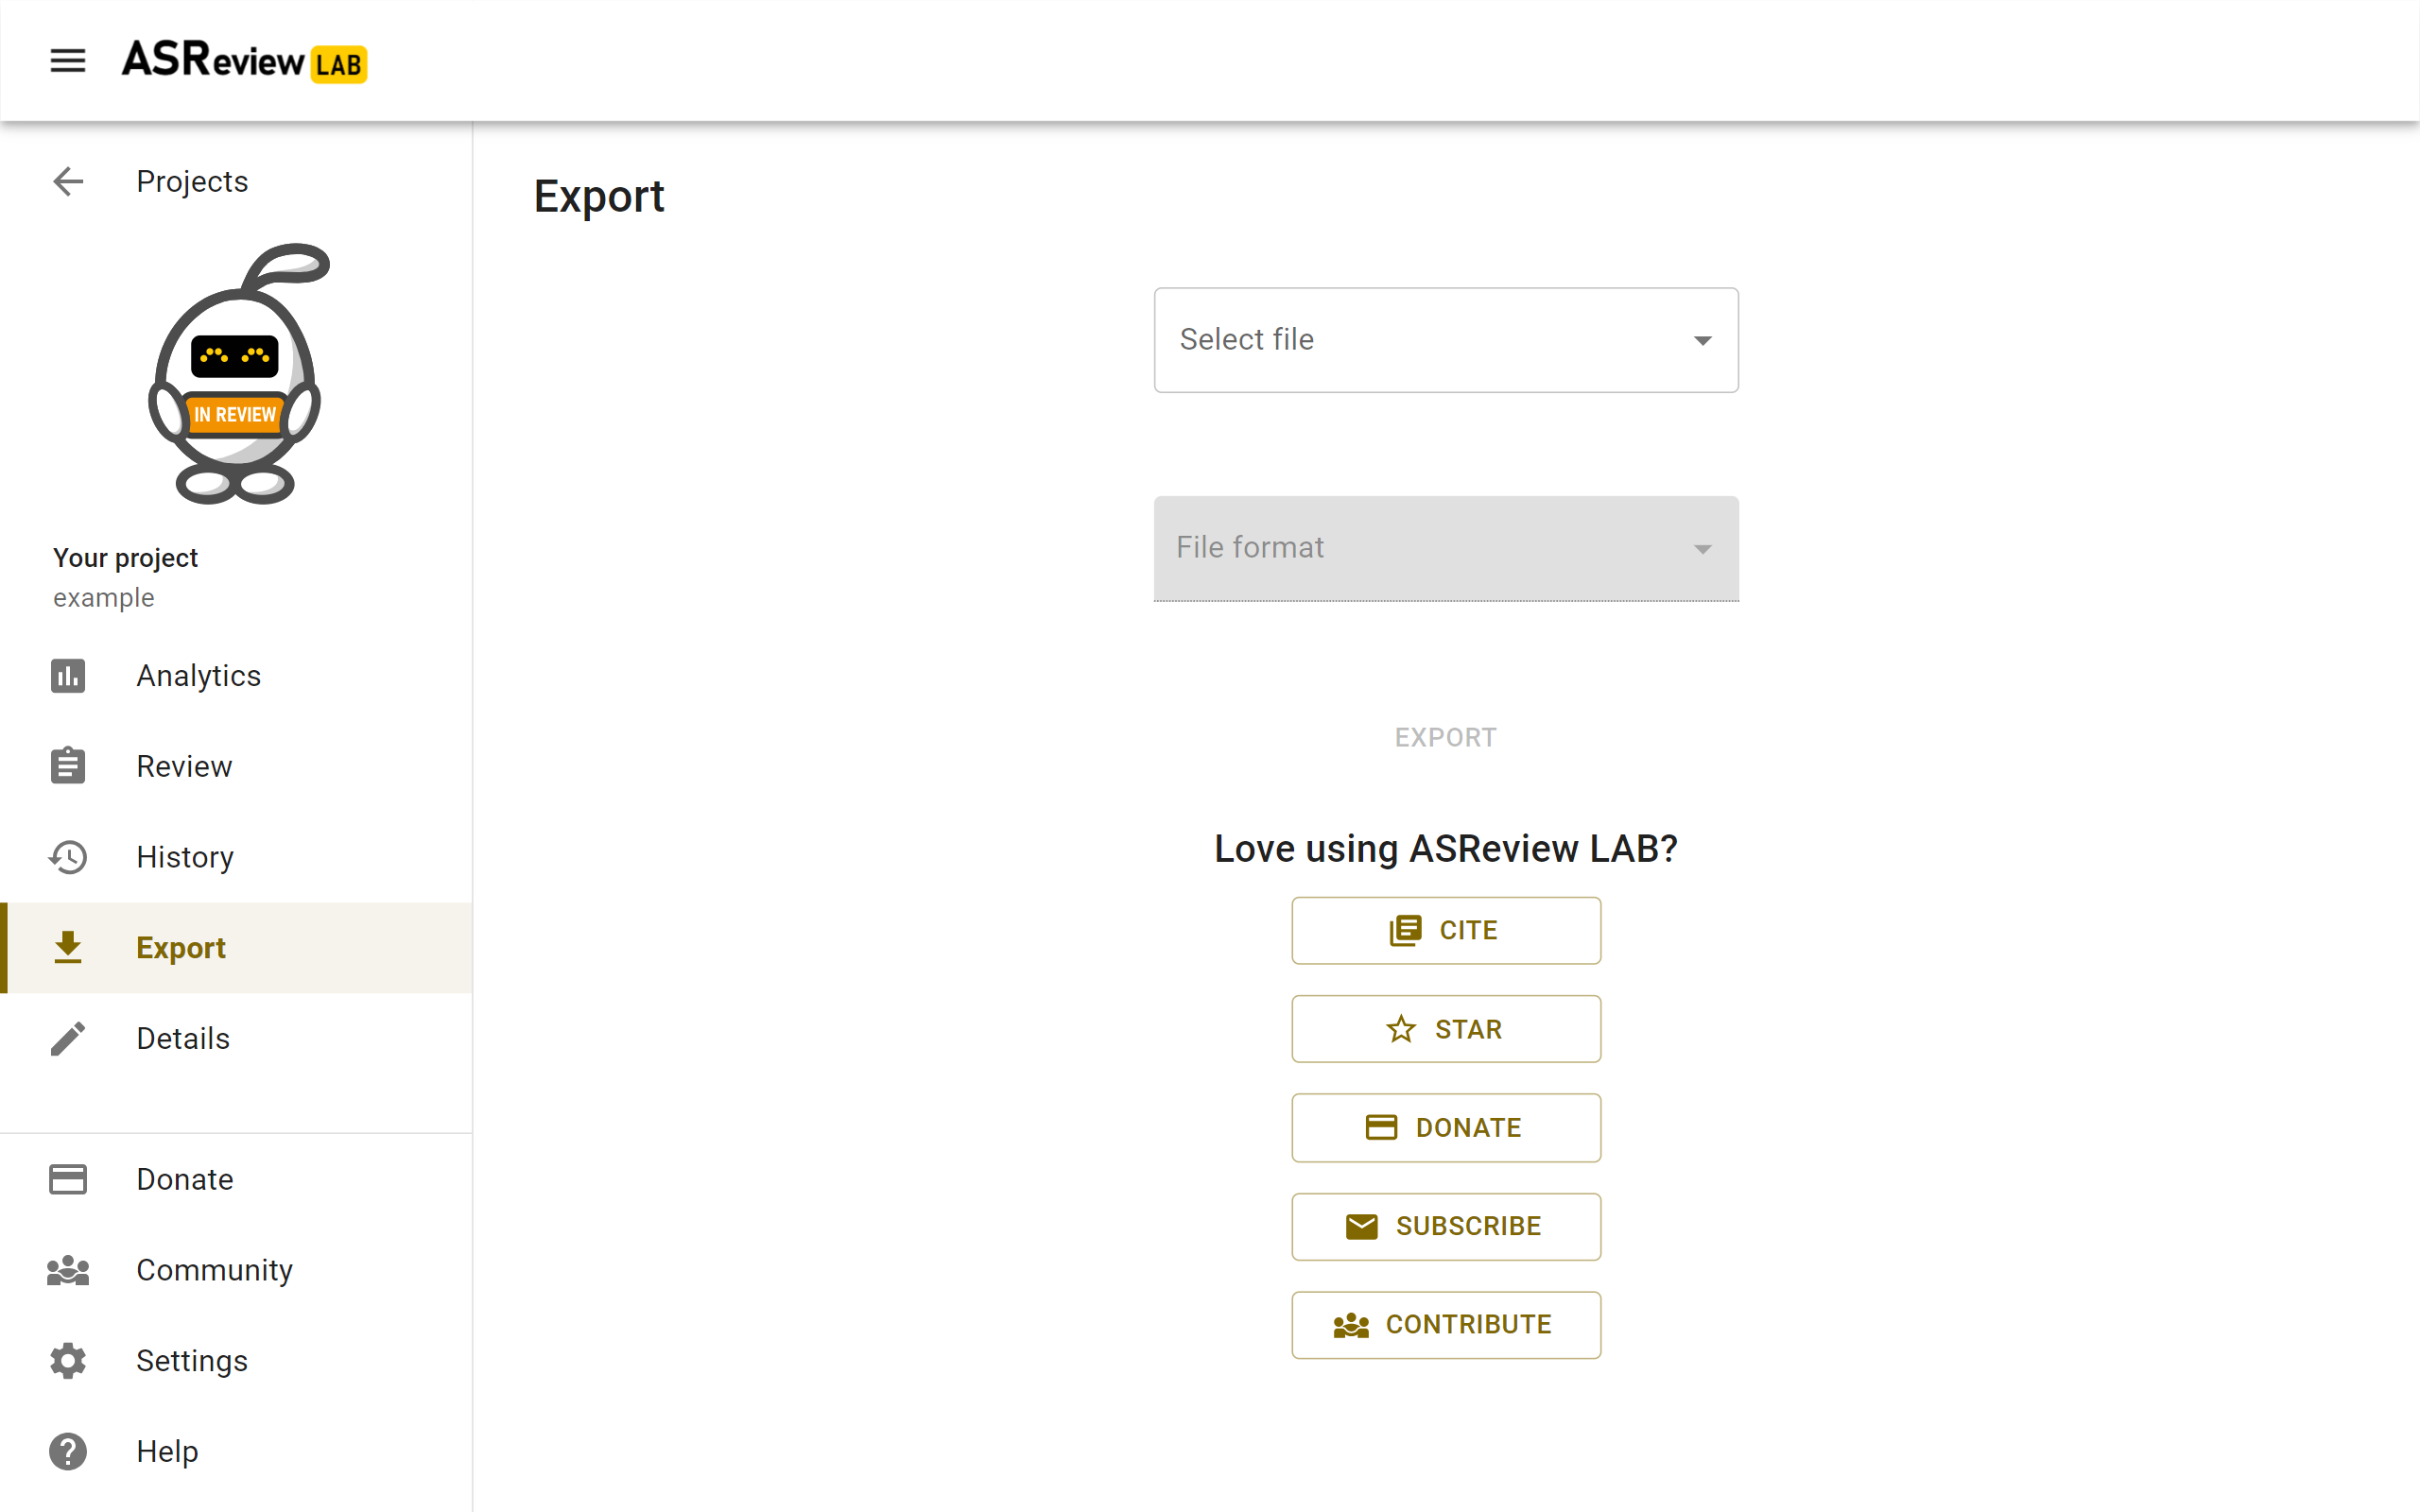 ASReview LAB Export screen